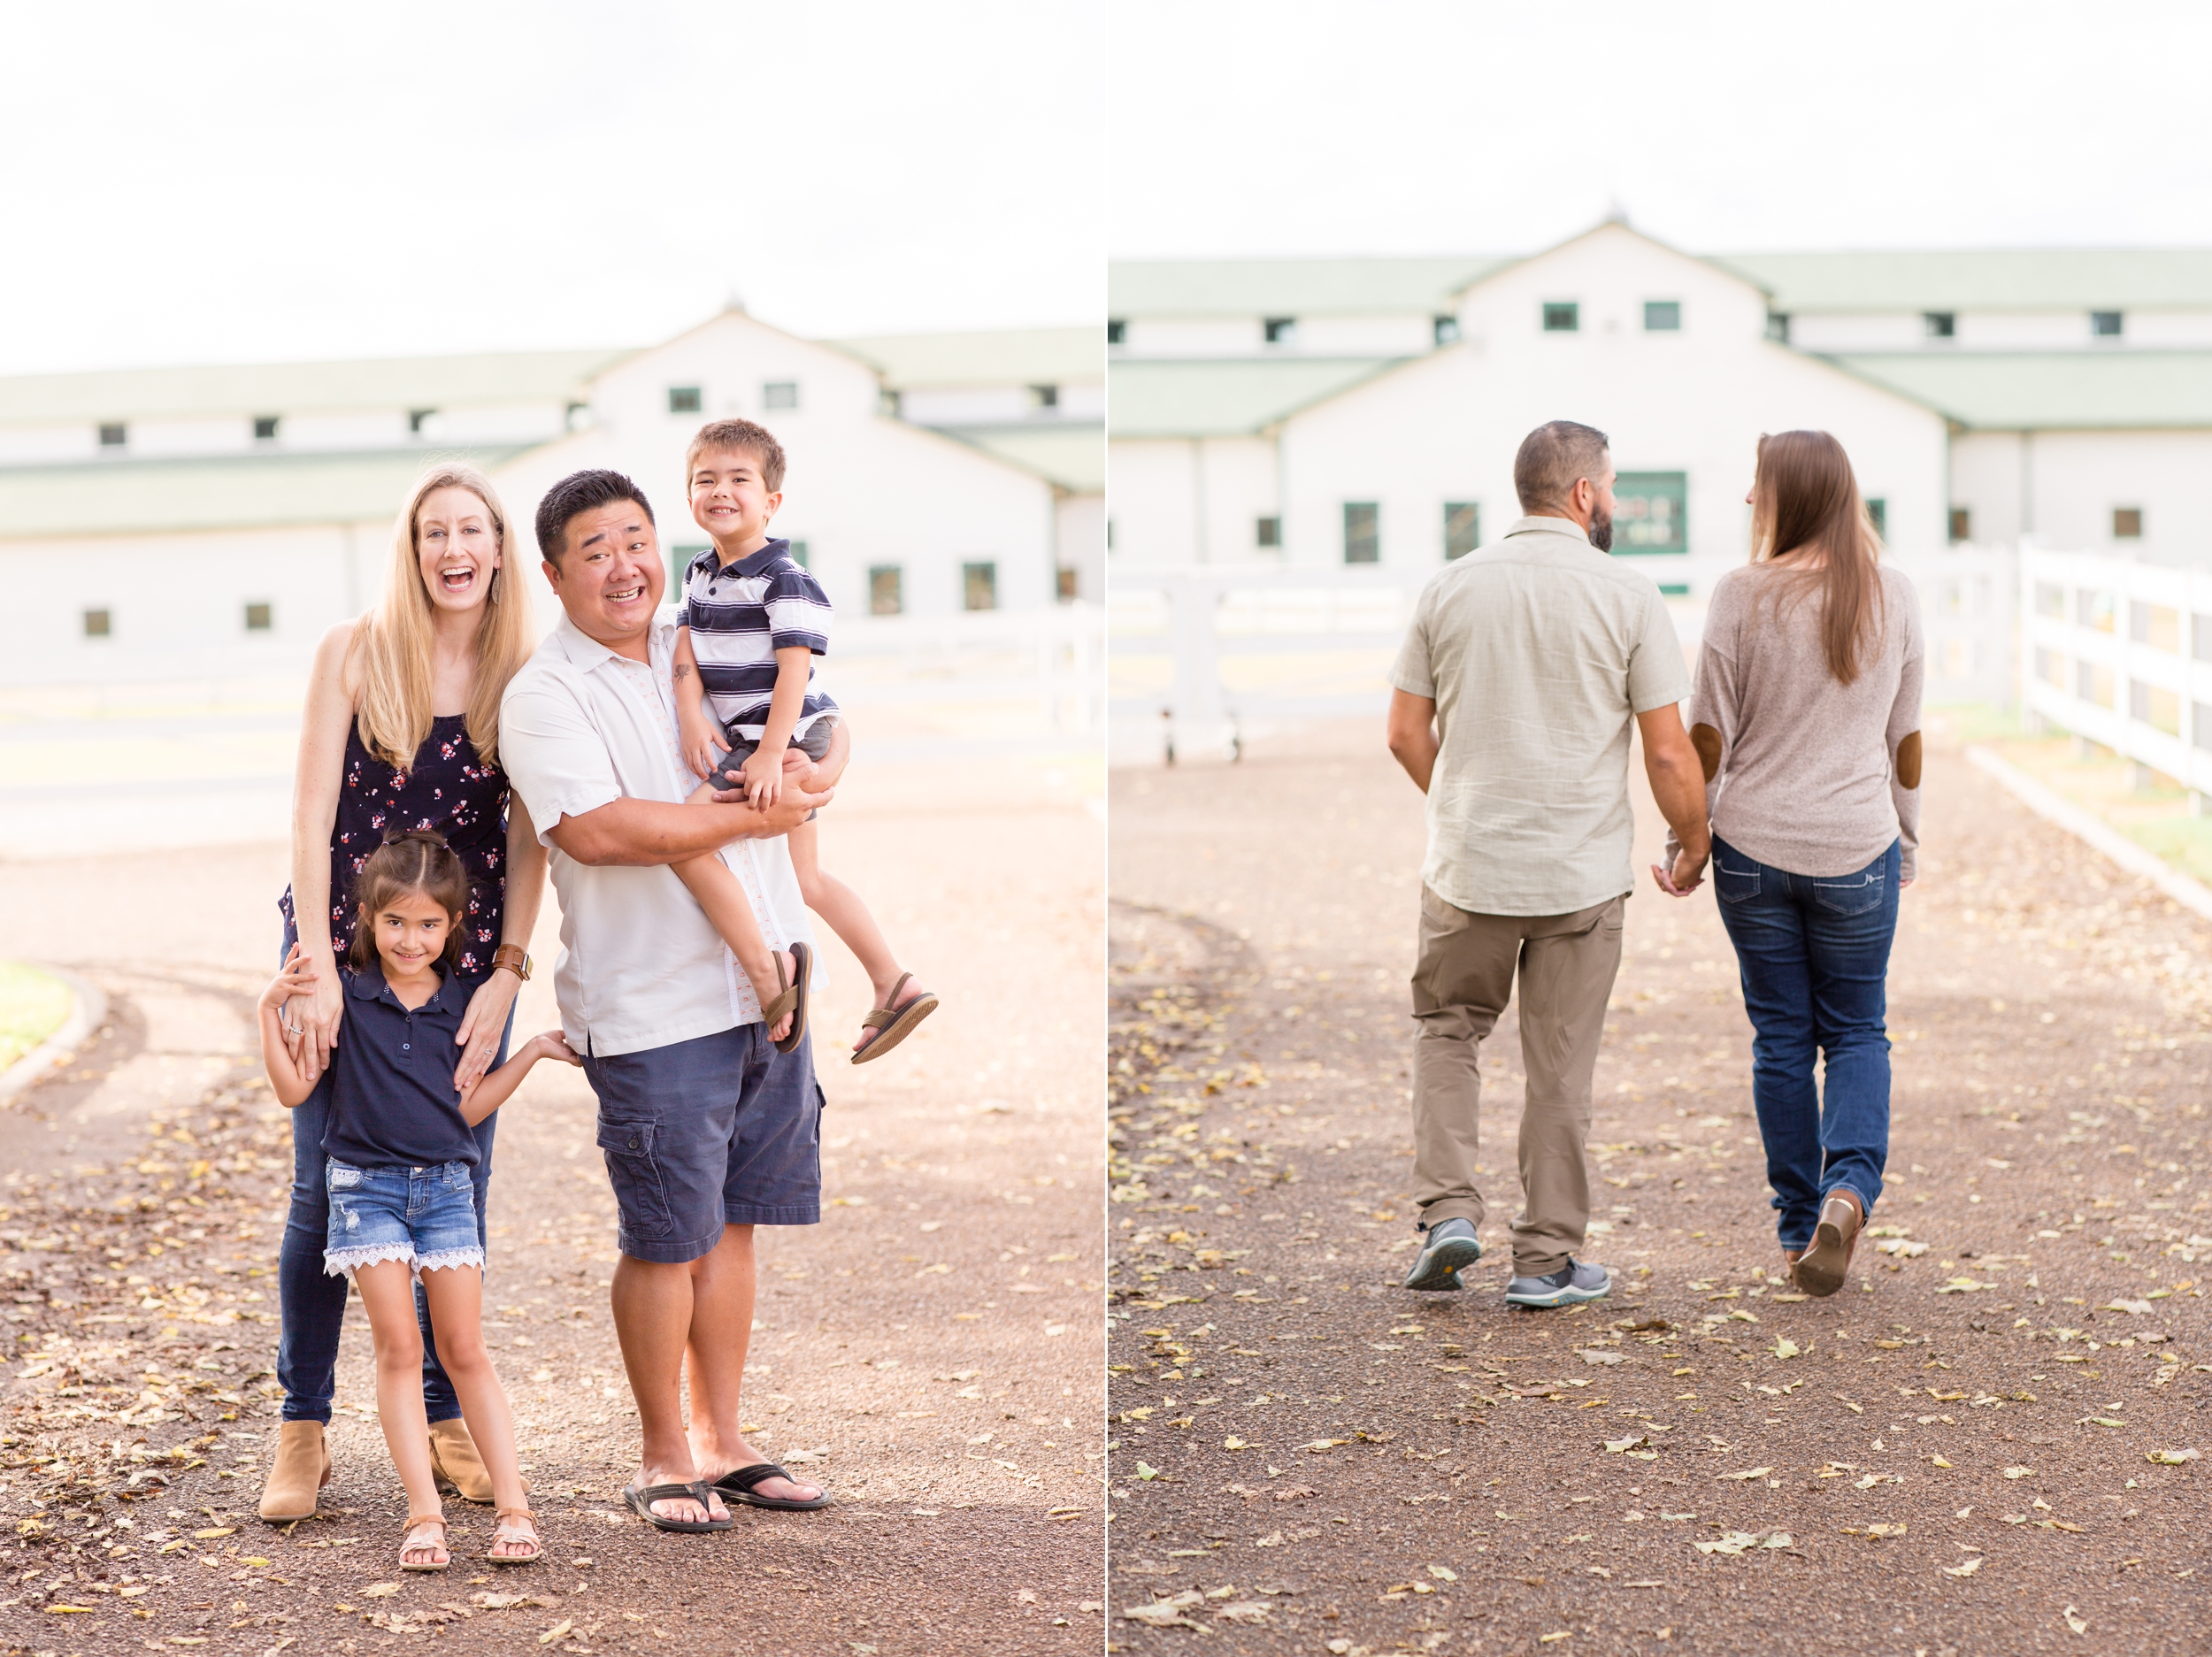 Family mini sessions at Harlinsdale Farm in Franklin, Tennessee with local realtor group. See more from this set of mini sessions shot by family photographer and educator Rebecca Rice Photography. 